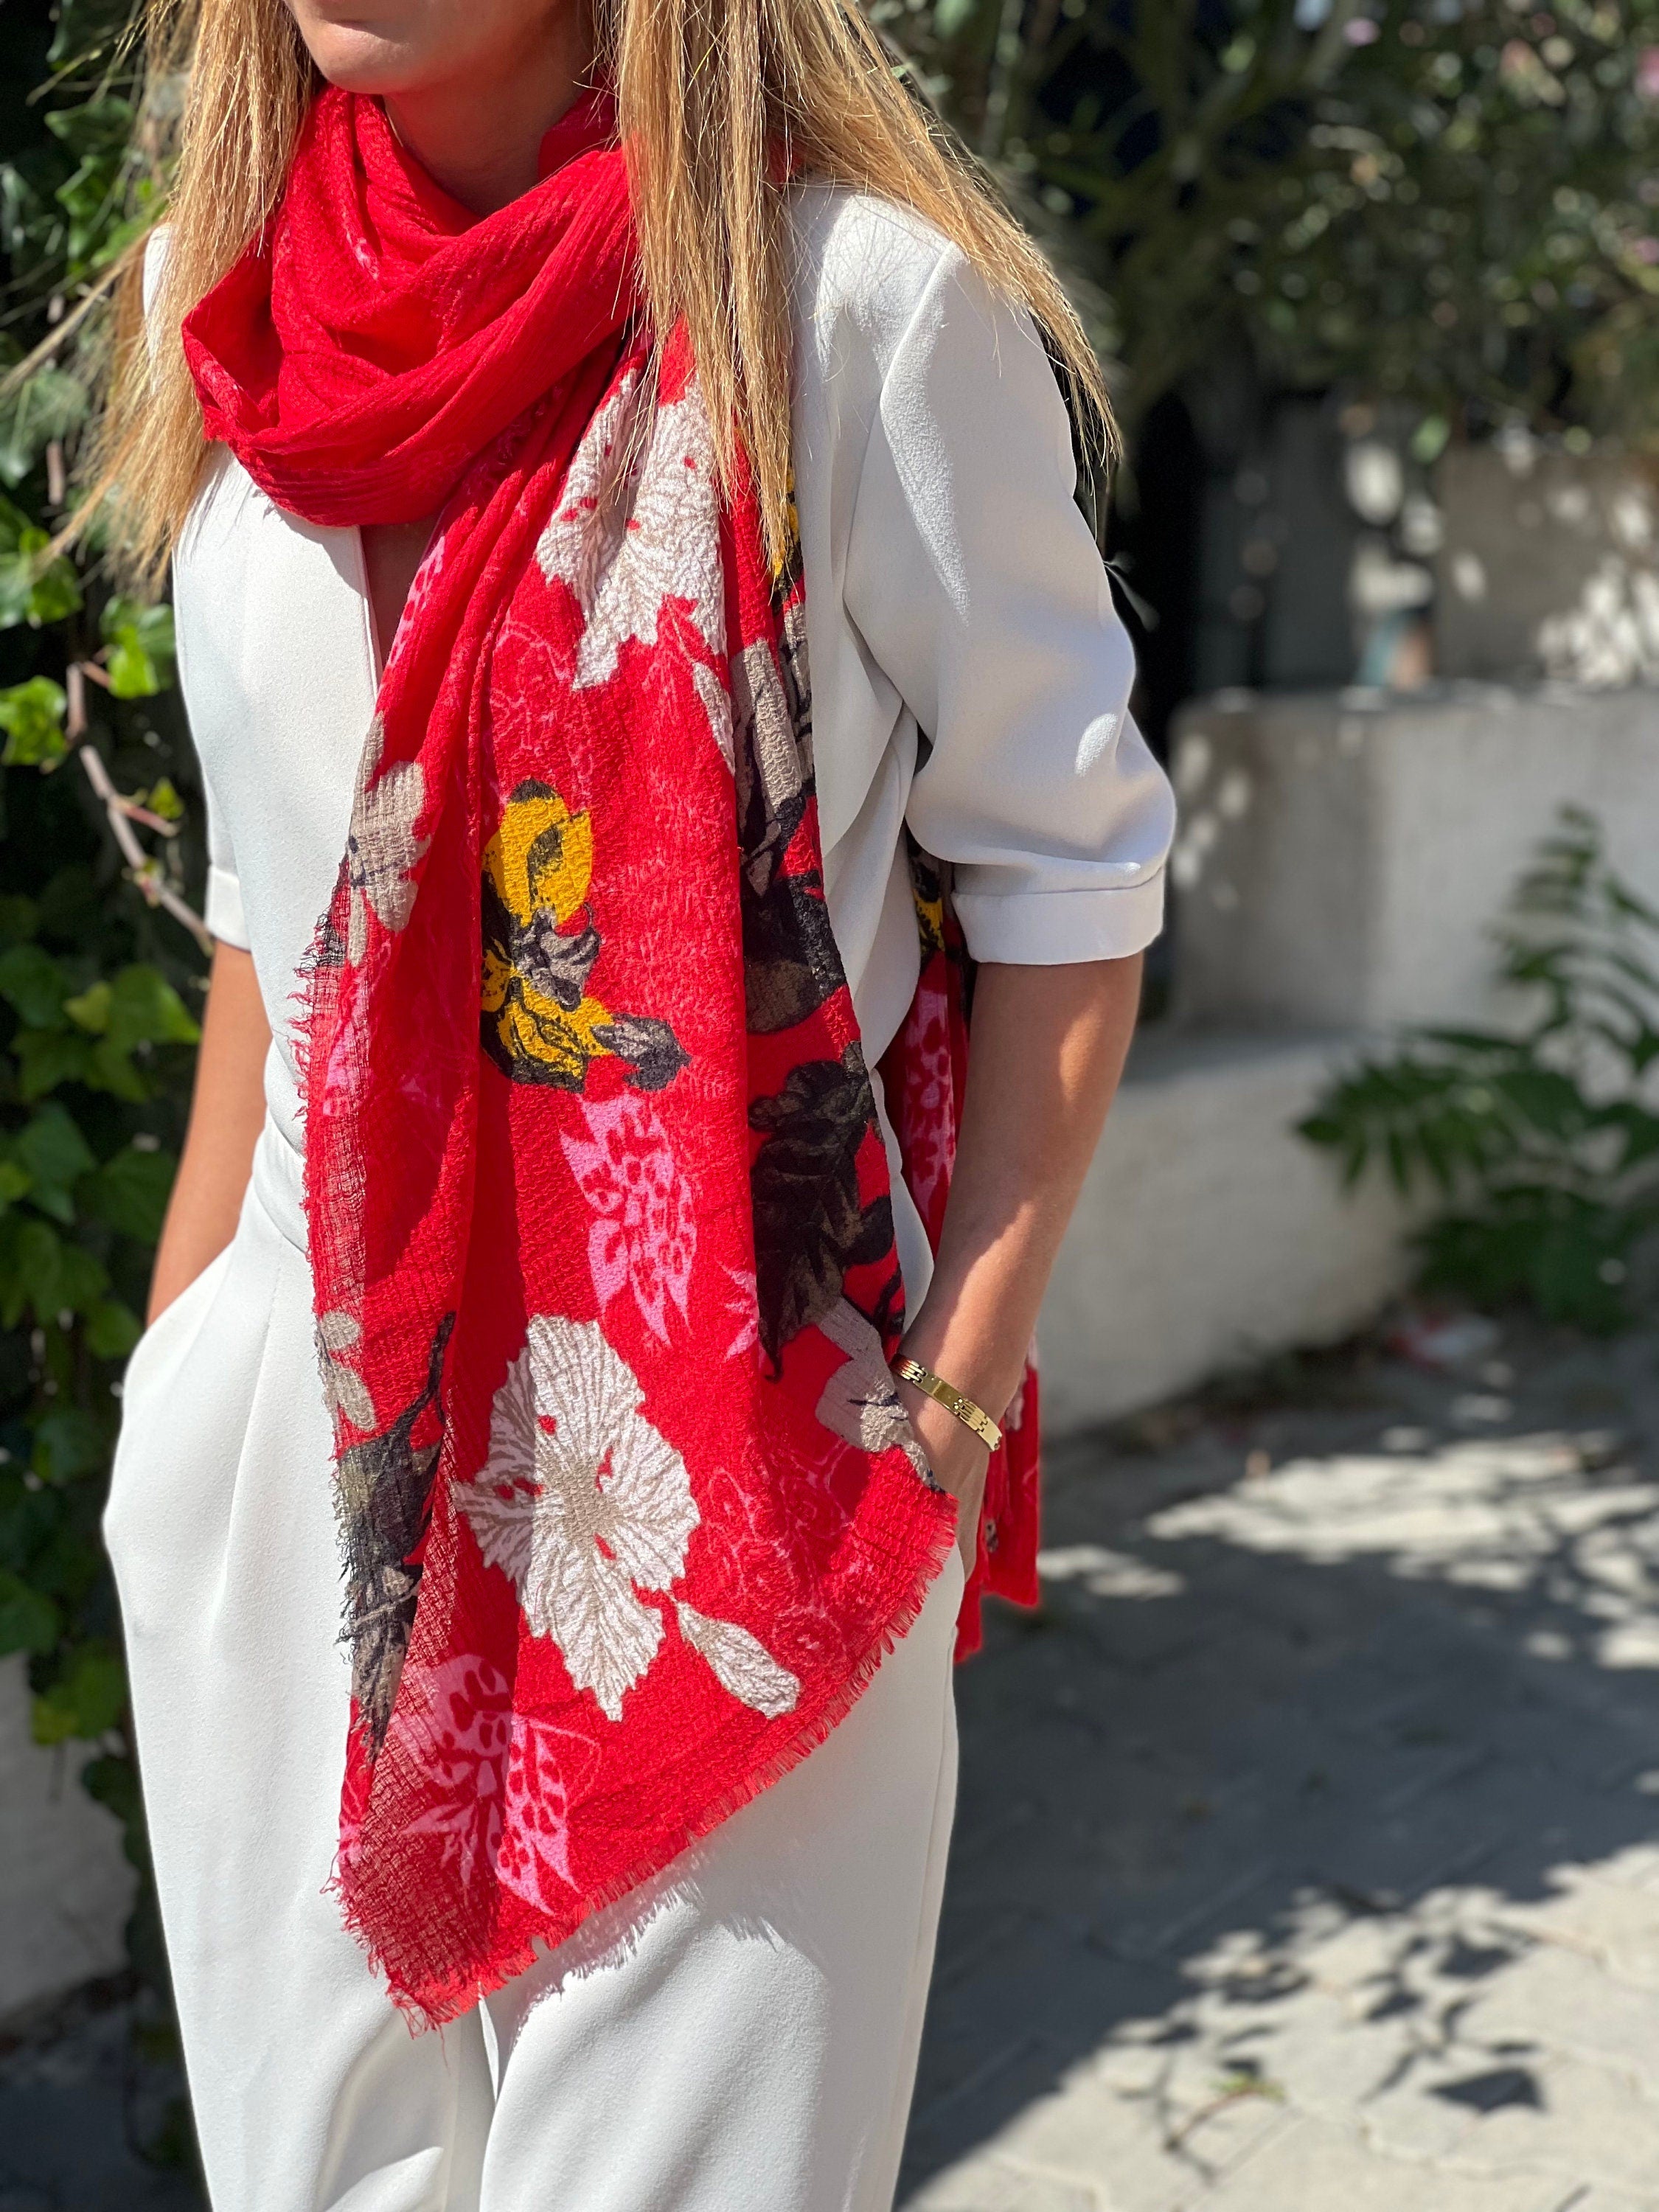 The bright red color of this scarf is sure to turn heads and make a statement.